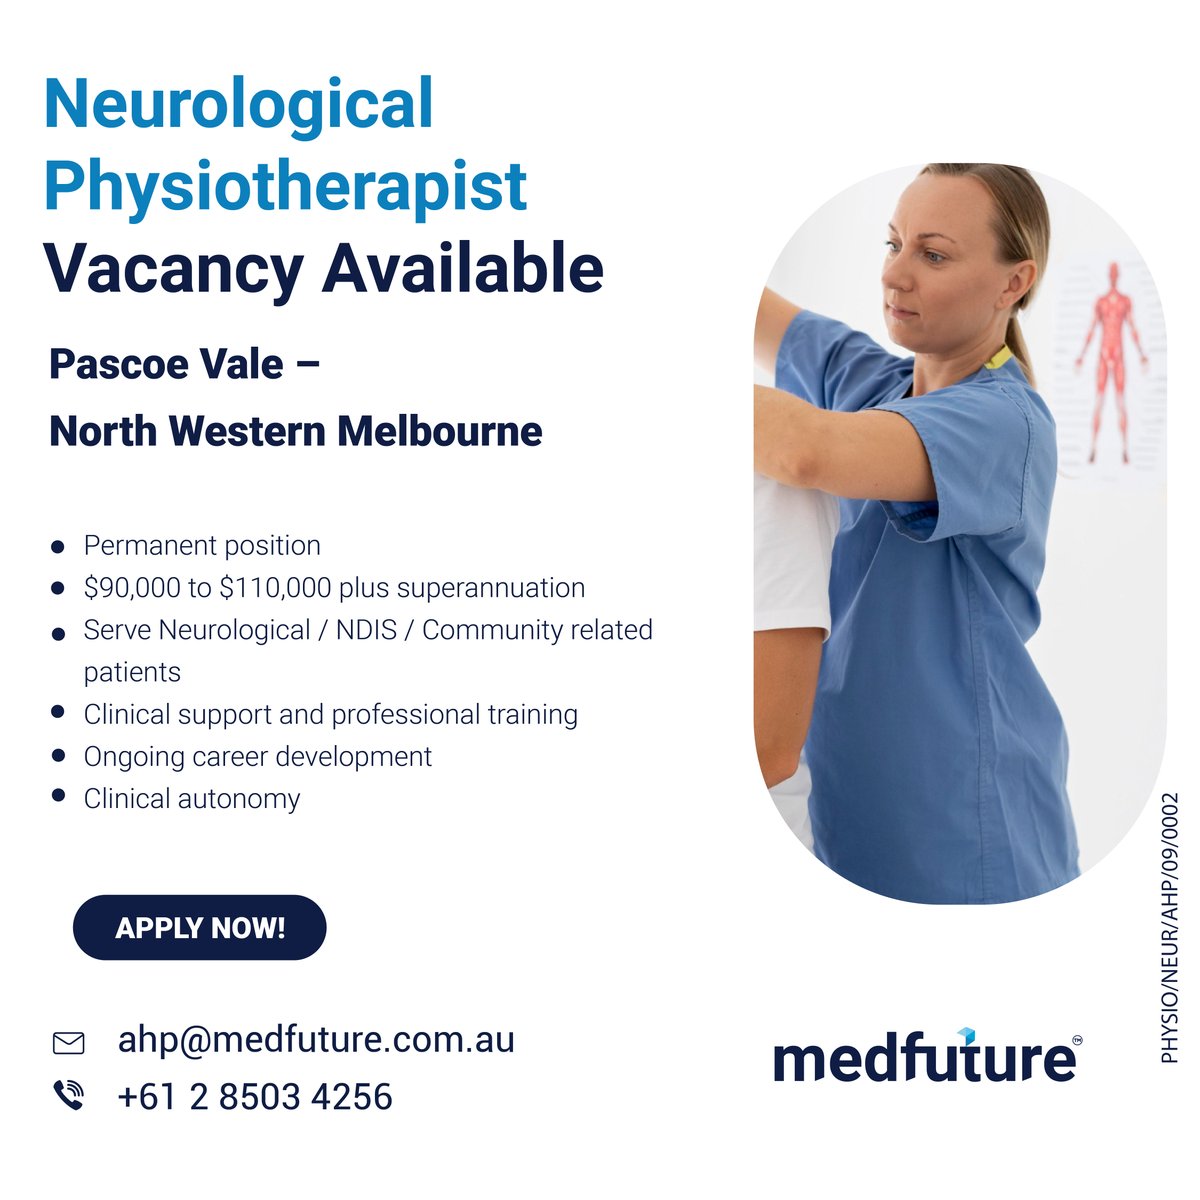 #NeurologicalPhysiotherapist vacancies are available in #PascoeVale. Discover the latest medical and healthcare professional job vacancies found in Australia and New Zealand when you subscribe with Medfuture.

Search Link - medfuture.com.au/job/permanent 

 #NDISjobs #PascoeValejobs